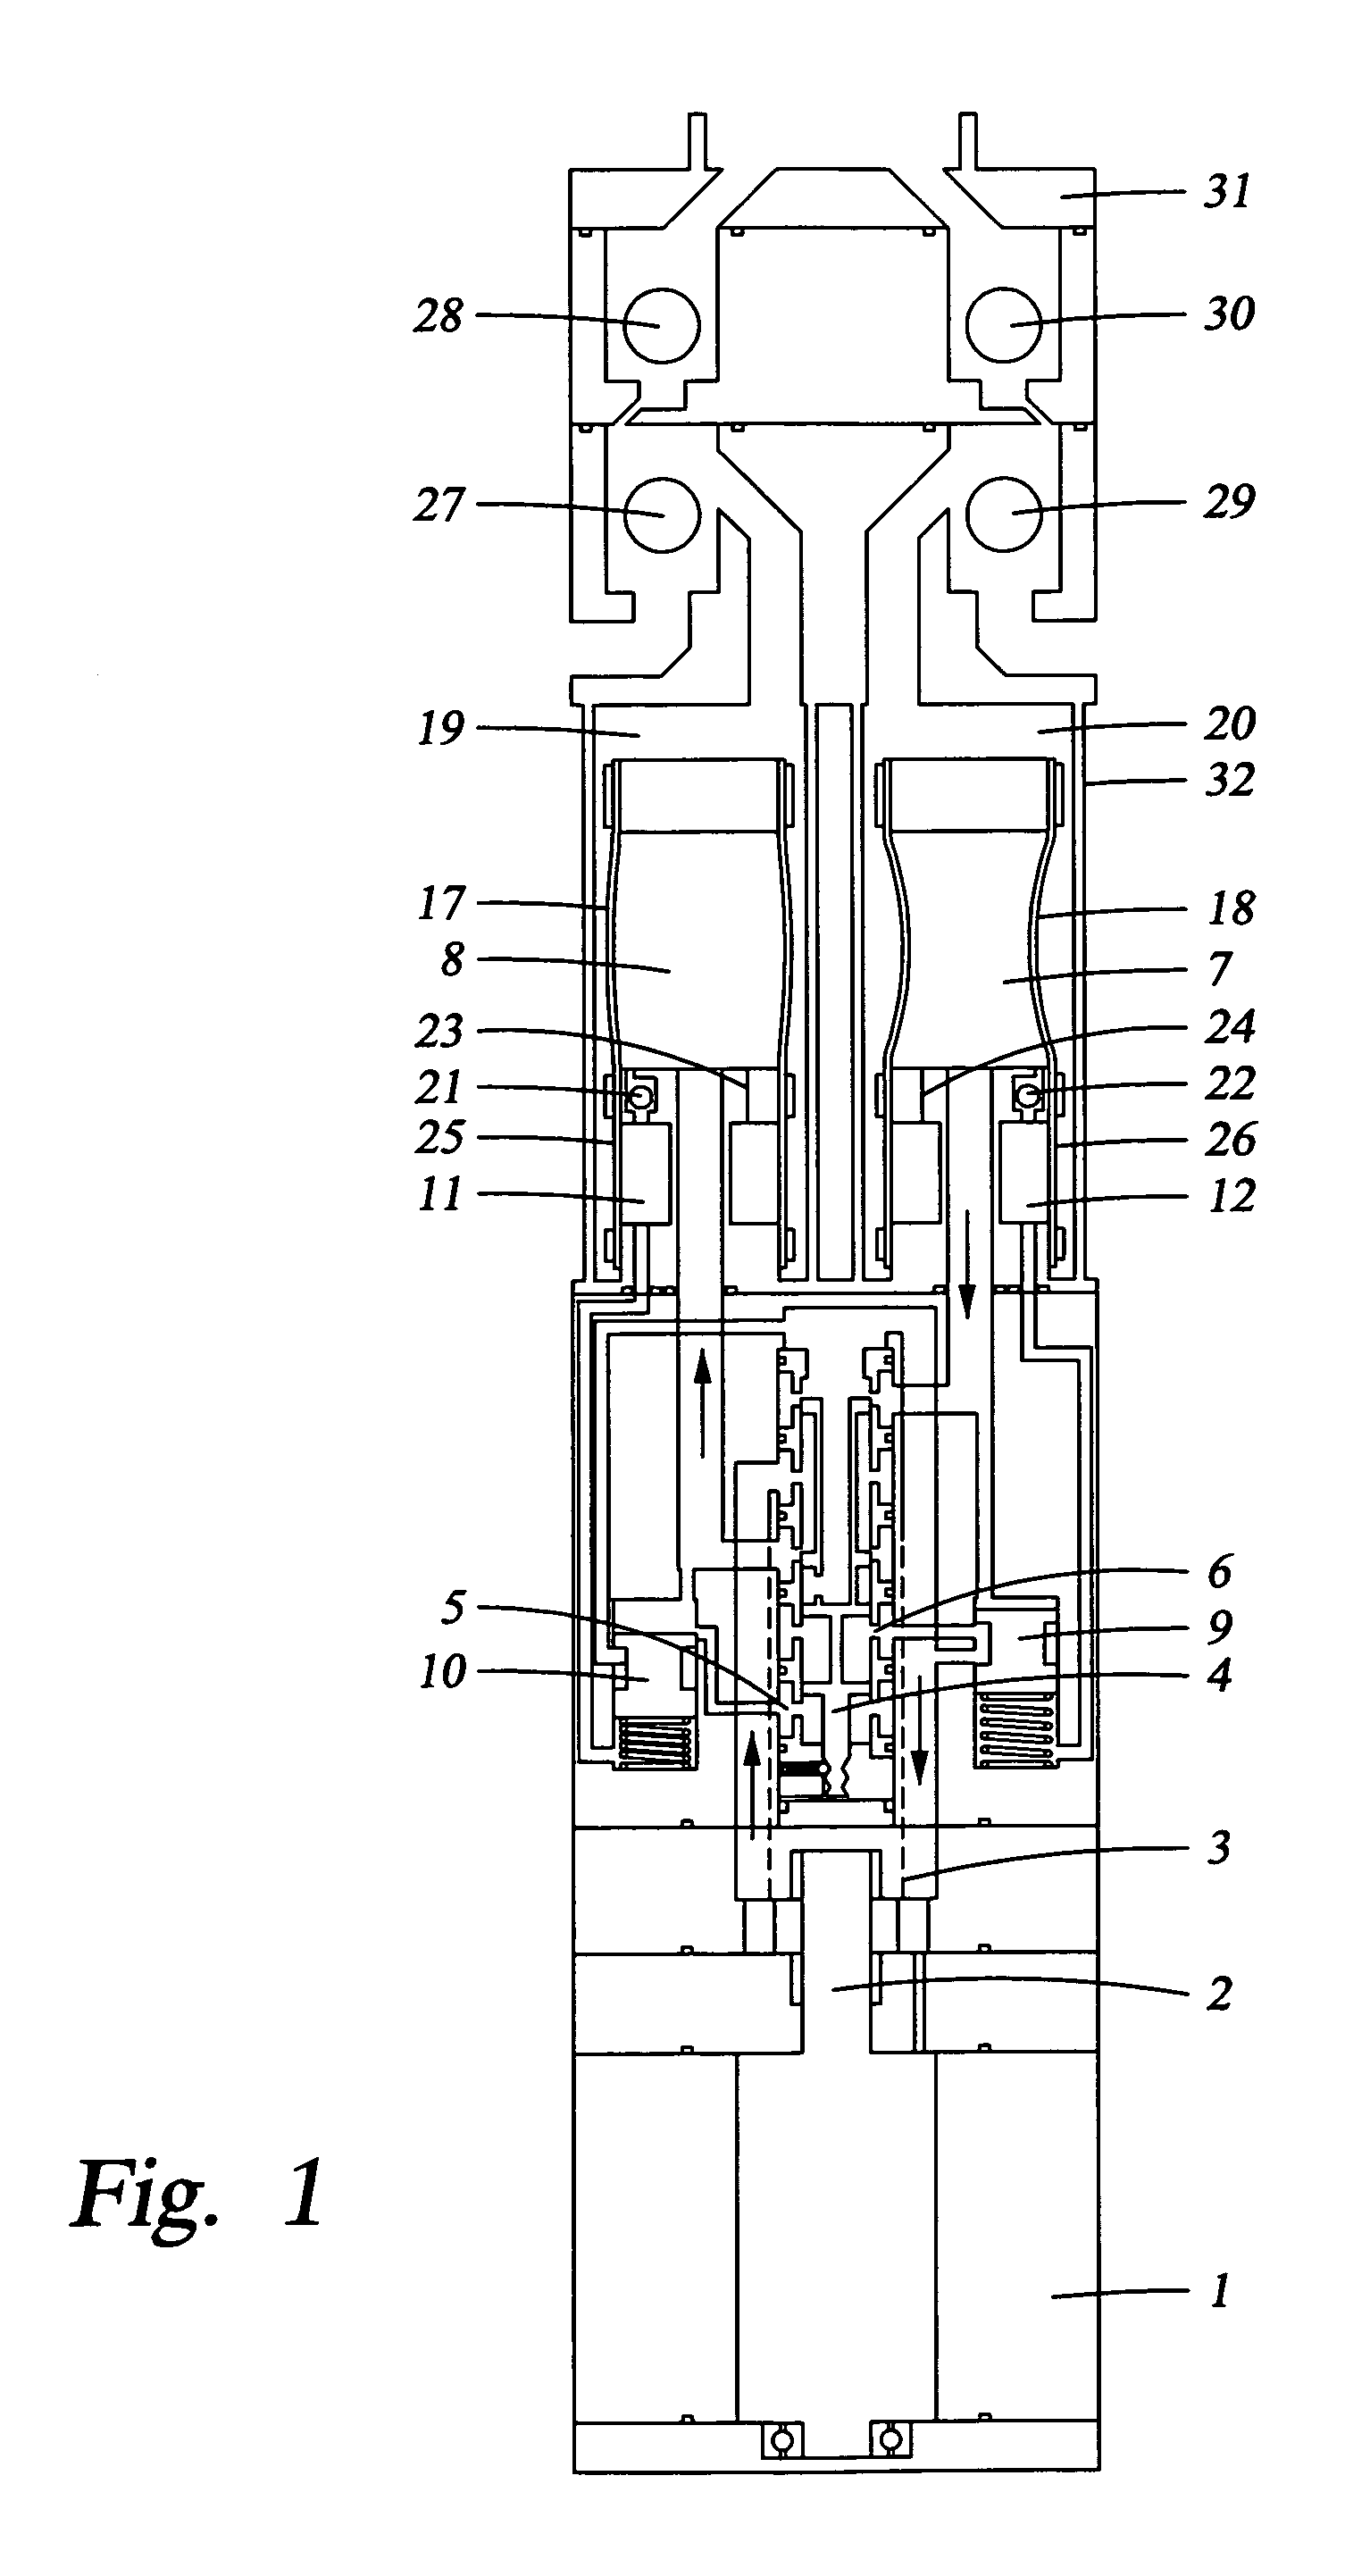 Submersible well pumping system with improved flow switching mechanism